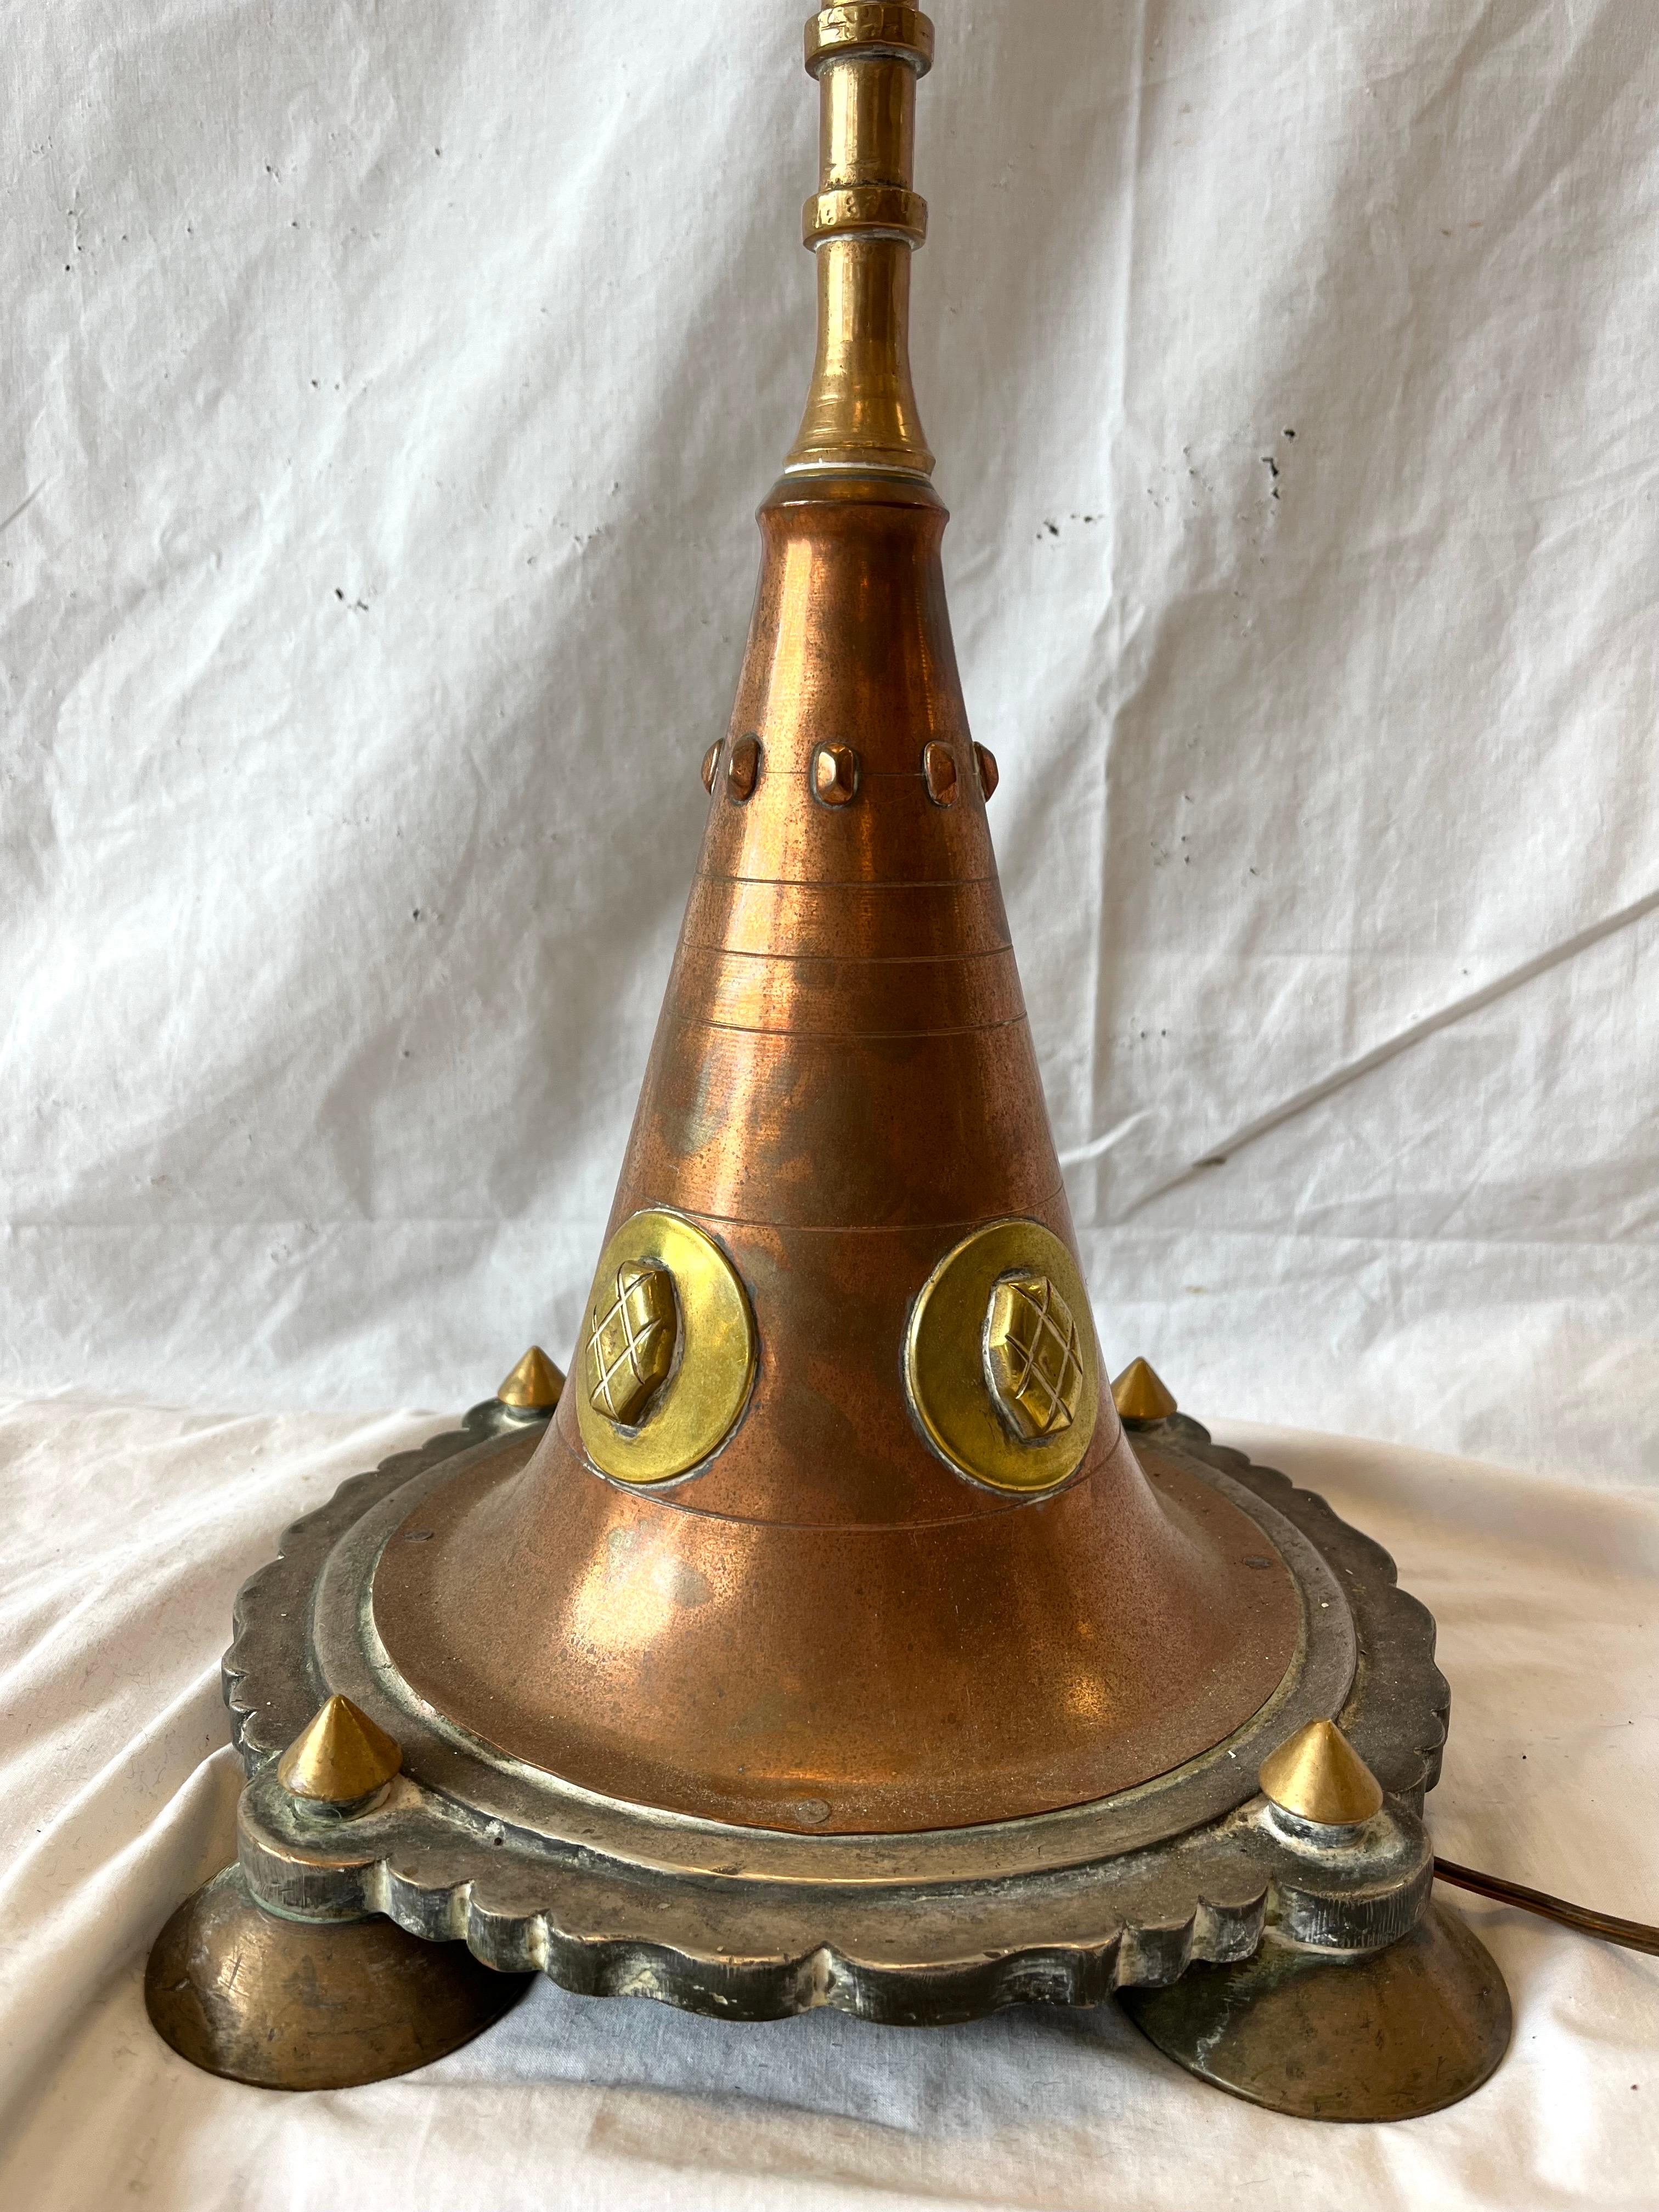 Antique Copper Brass Mixed Metal Ornate Moorish Style Hand Crafted Floor Lamp For Sale 5